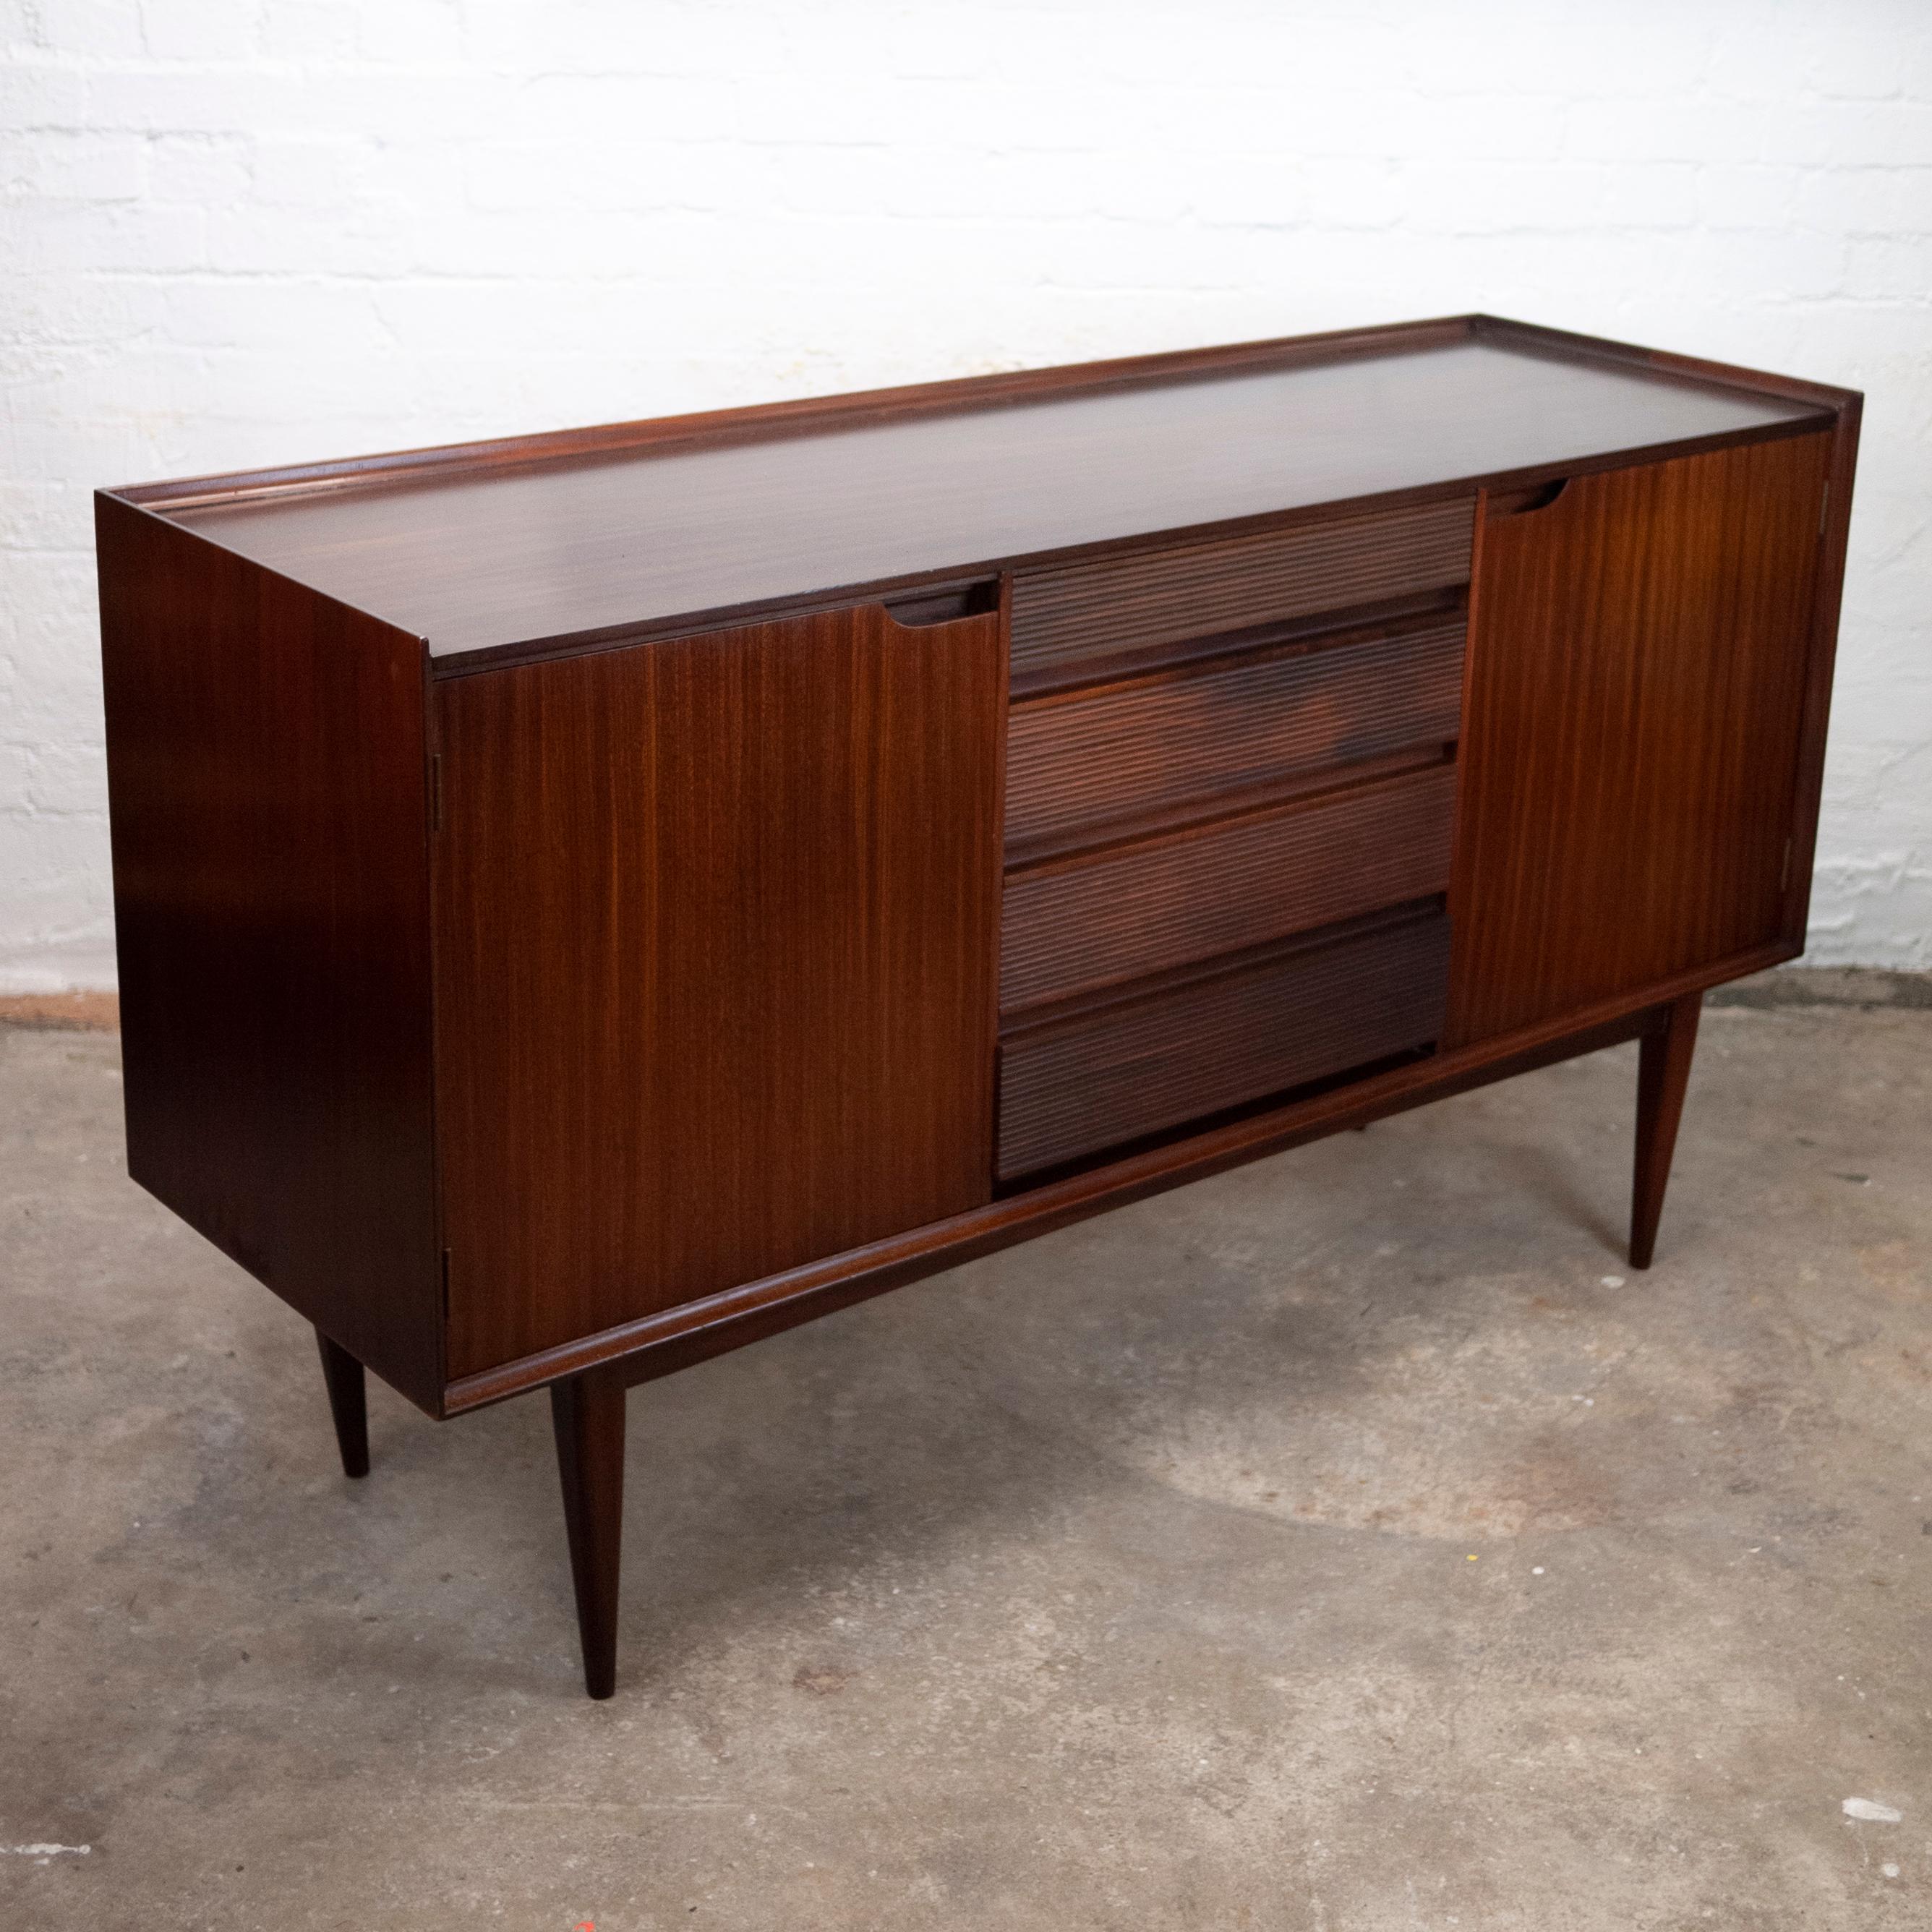 British Afromosia Sideboard by Richard Hornby for Fyne Ladye Furniture, 1960s